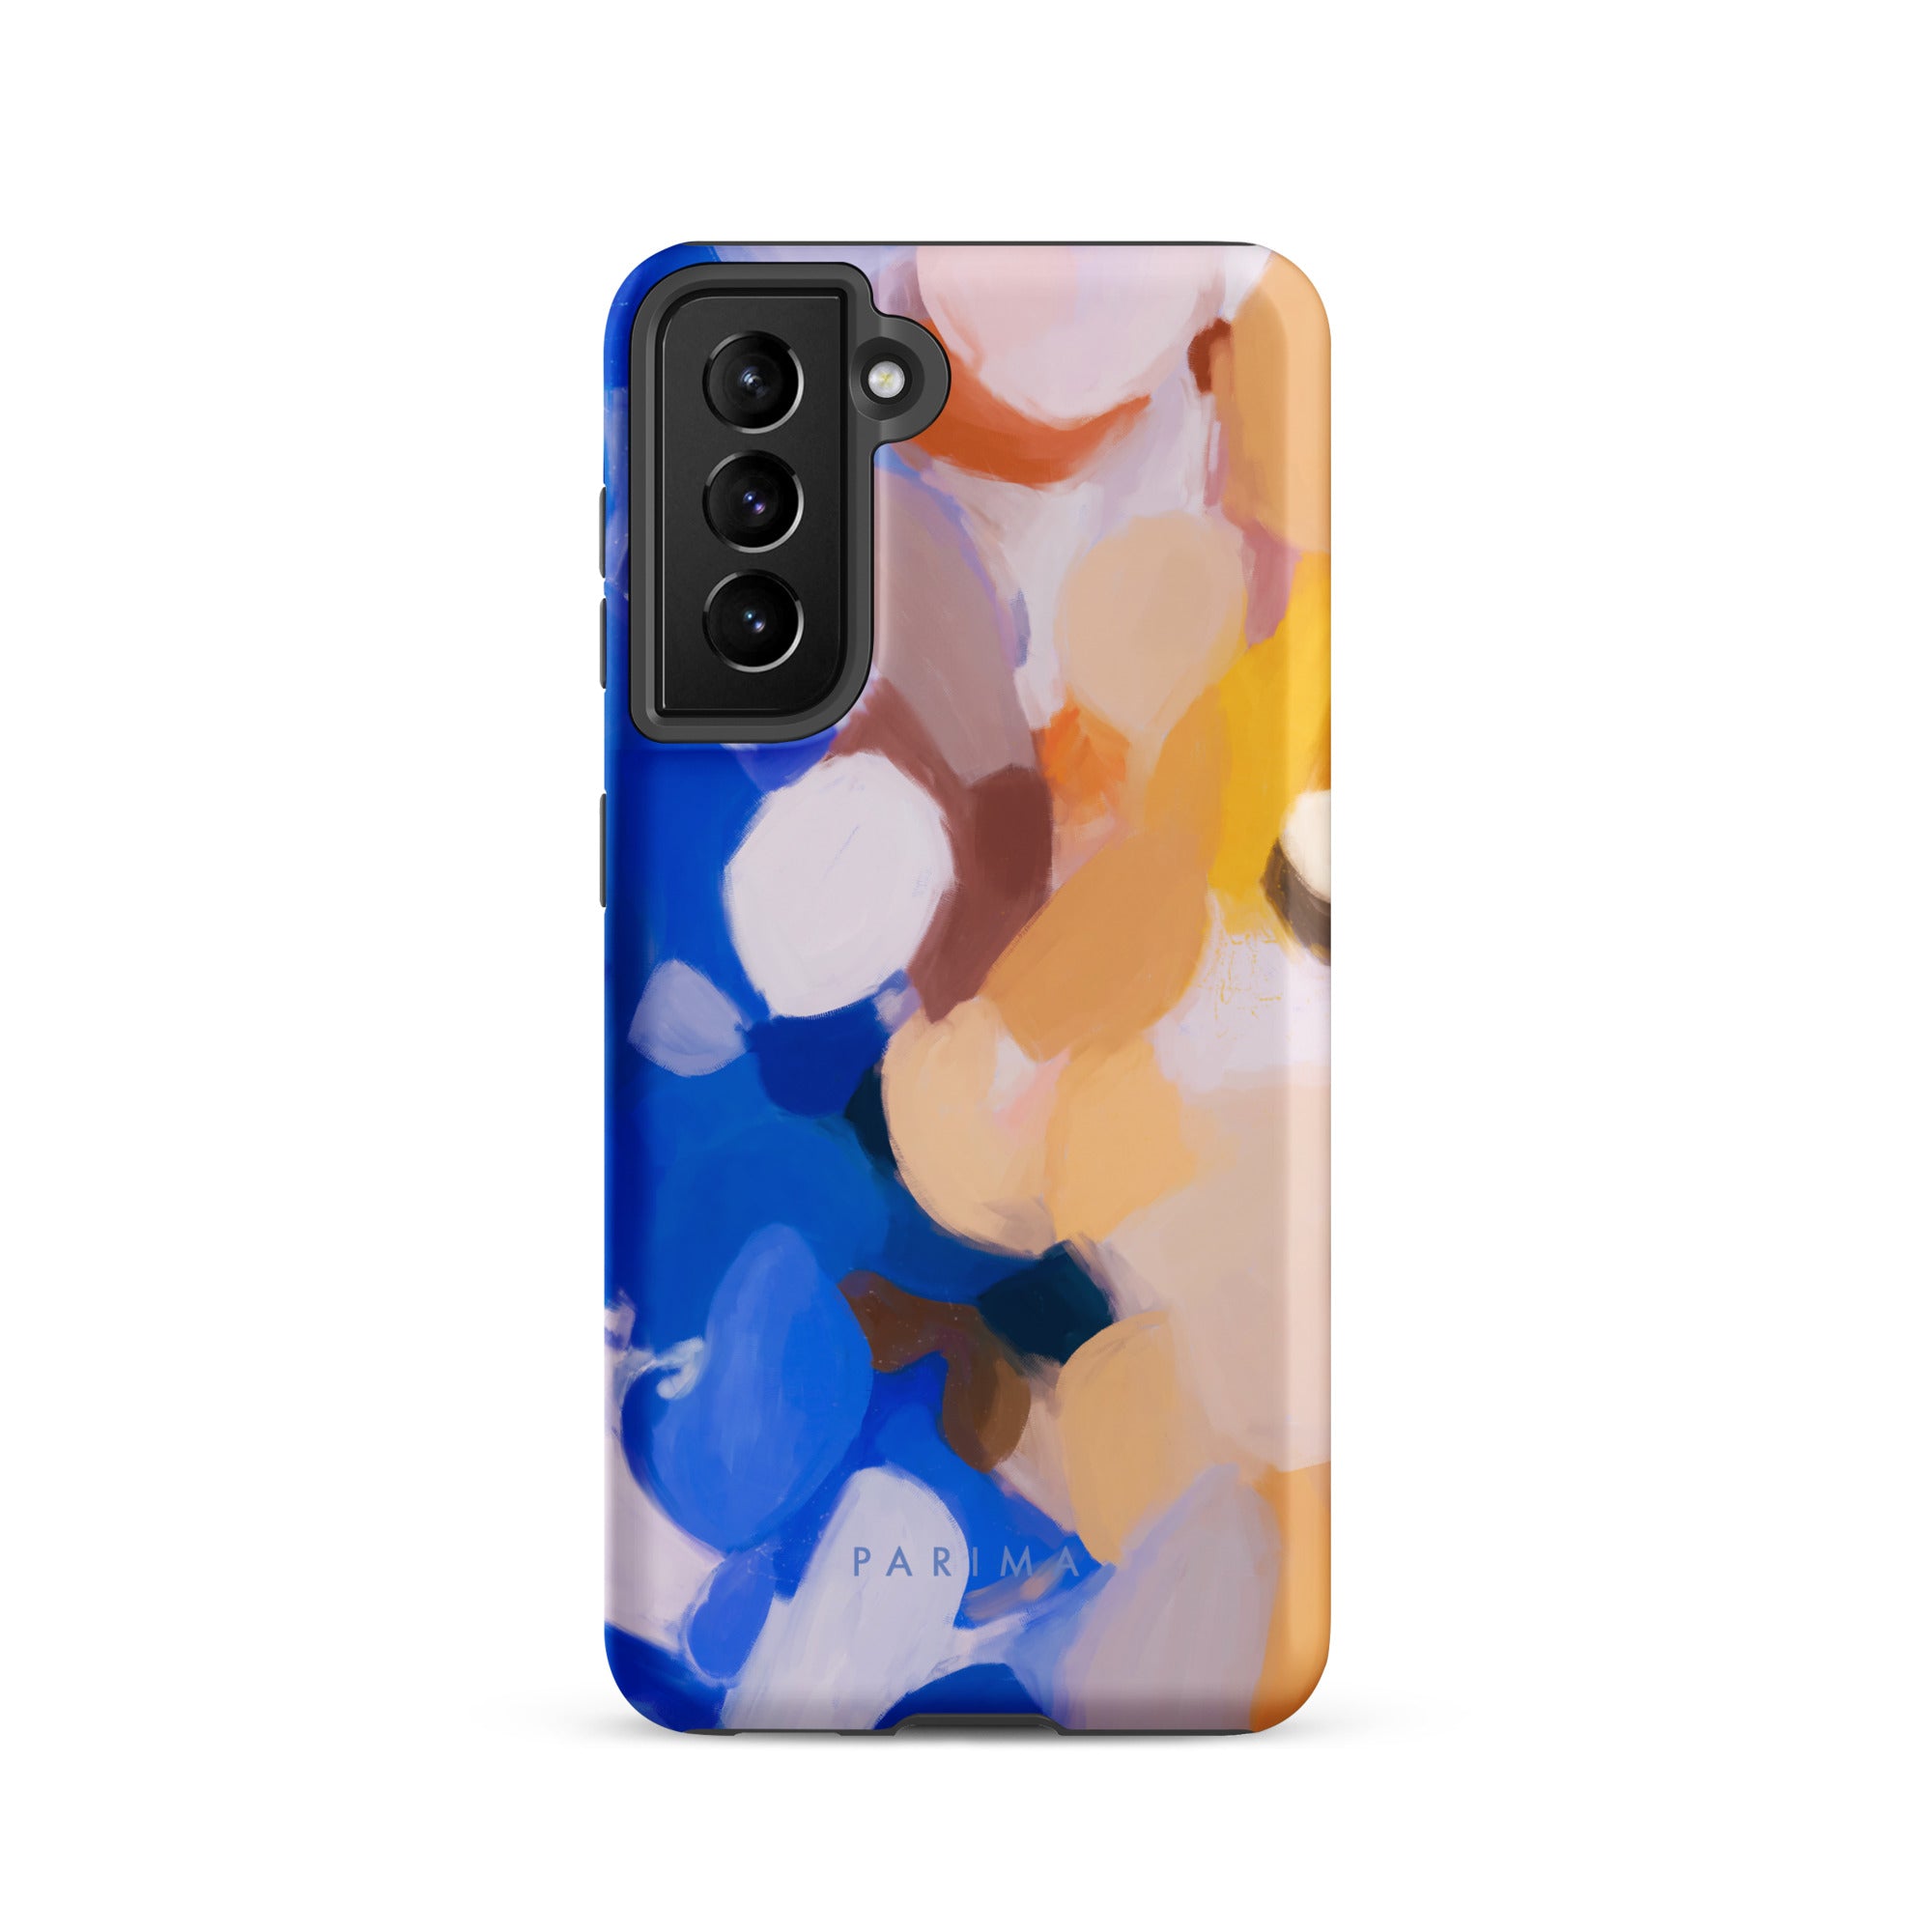 Bluebell, blue and yellow abstract art on Samsung Galaxy S21 tough case by Parima Studio